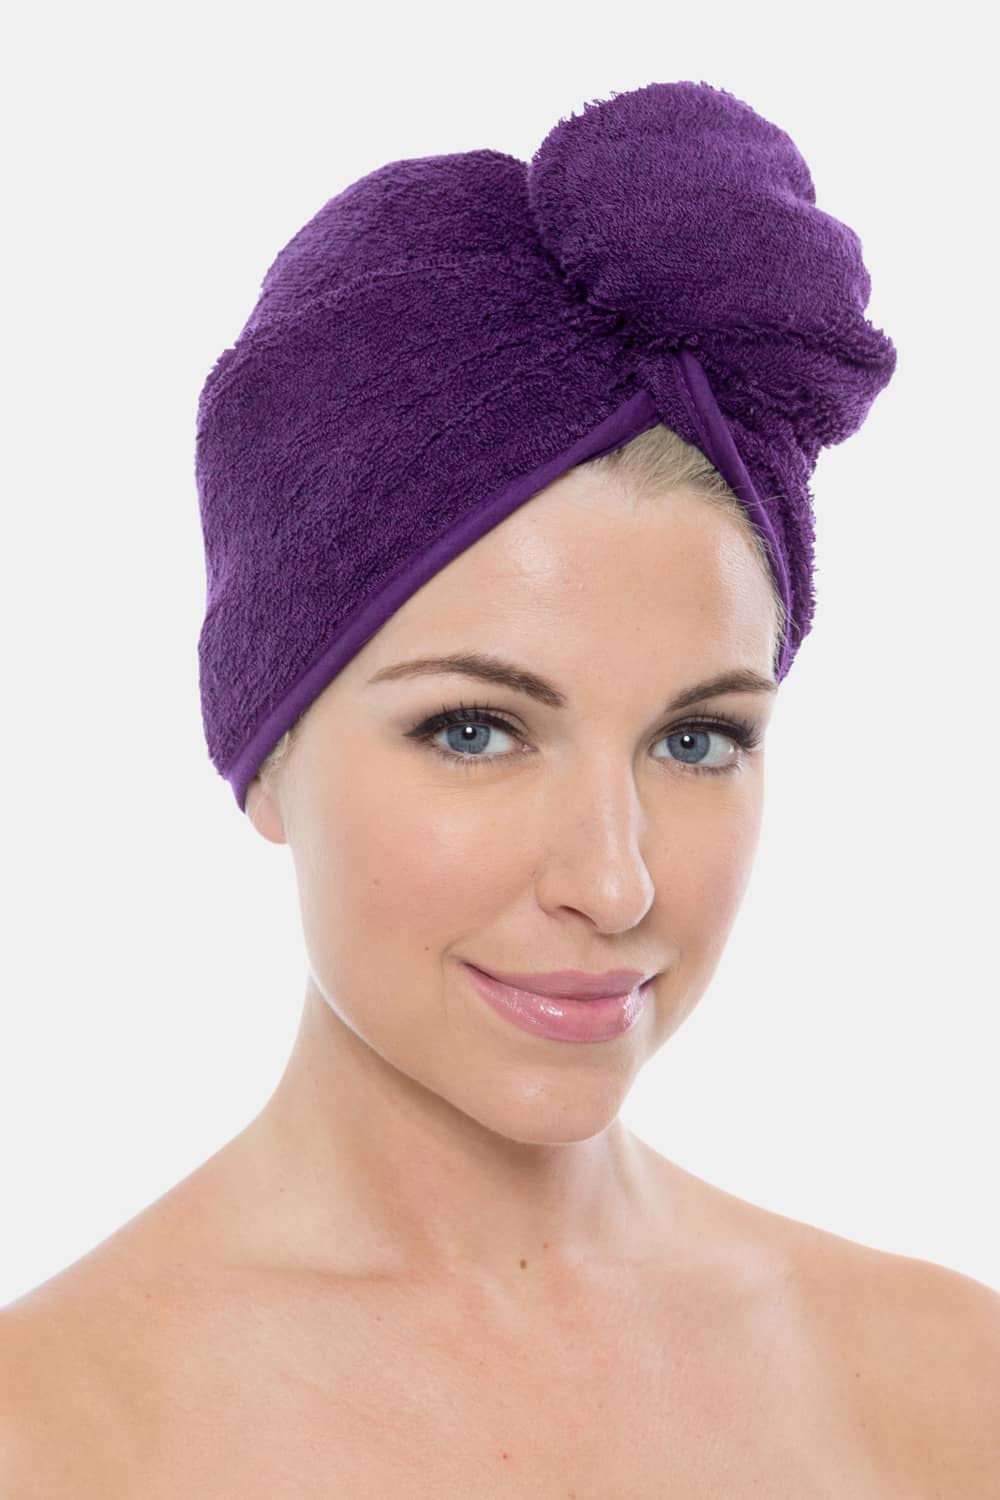 Texere Women's Terry Cloth Hair Towel / Wrap Womens>Spa>Hair Towel Fishers Finery Purple 